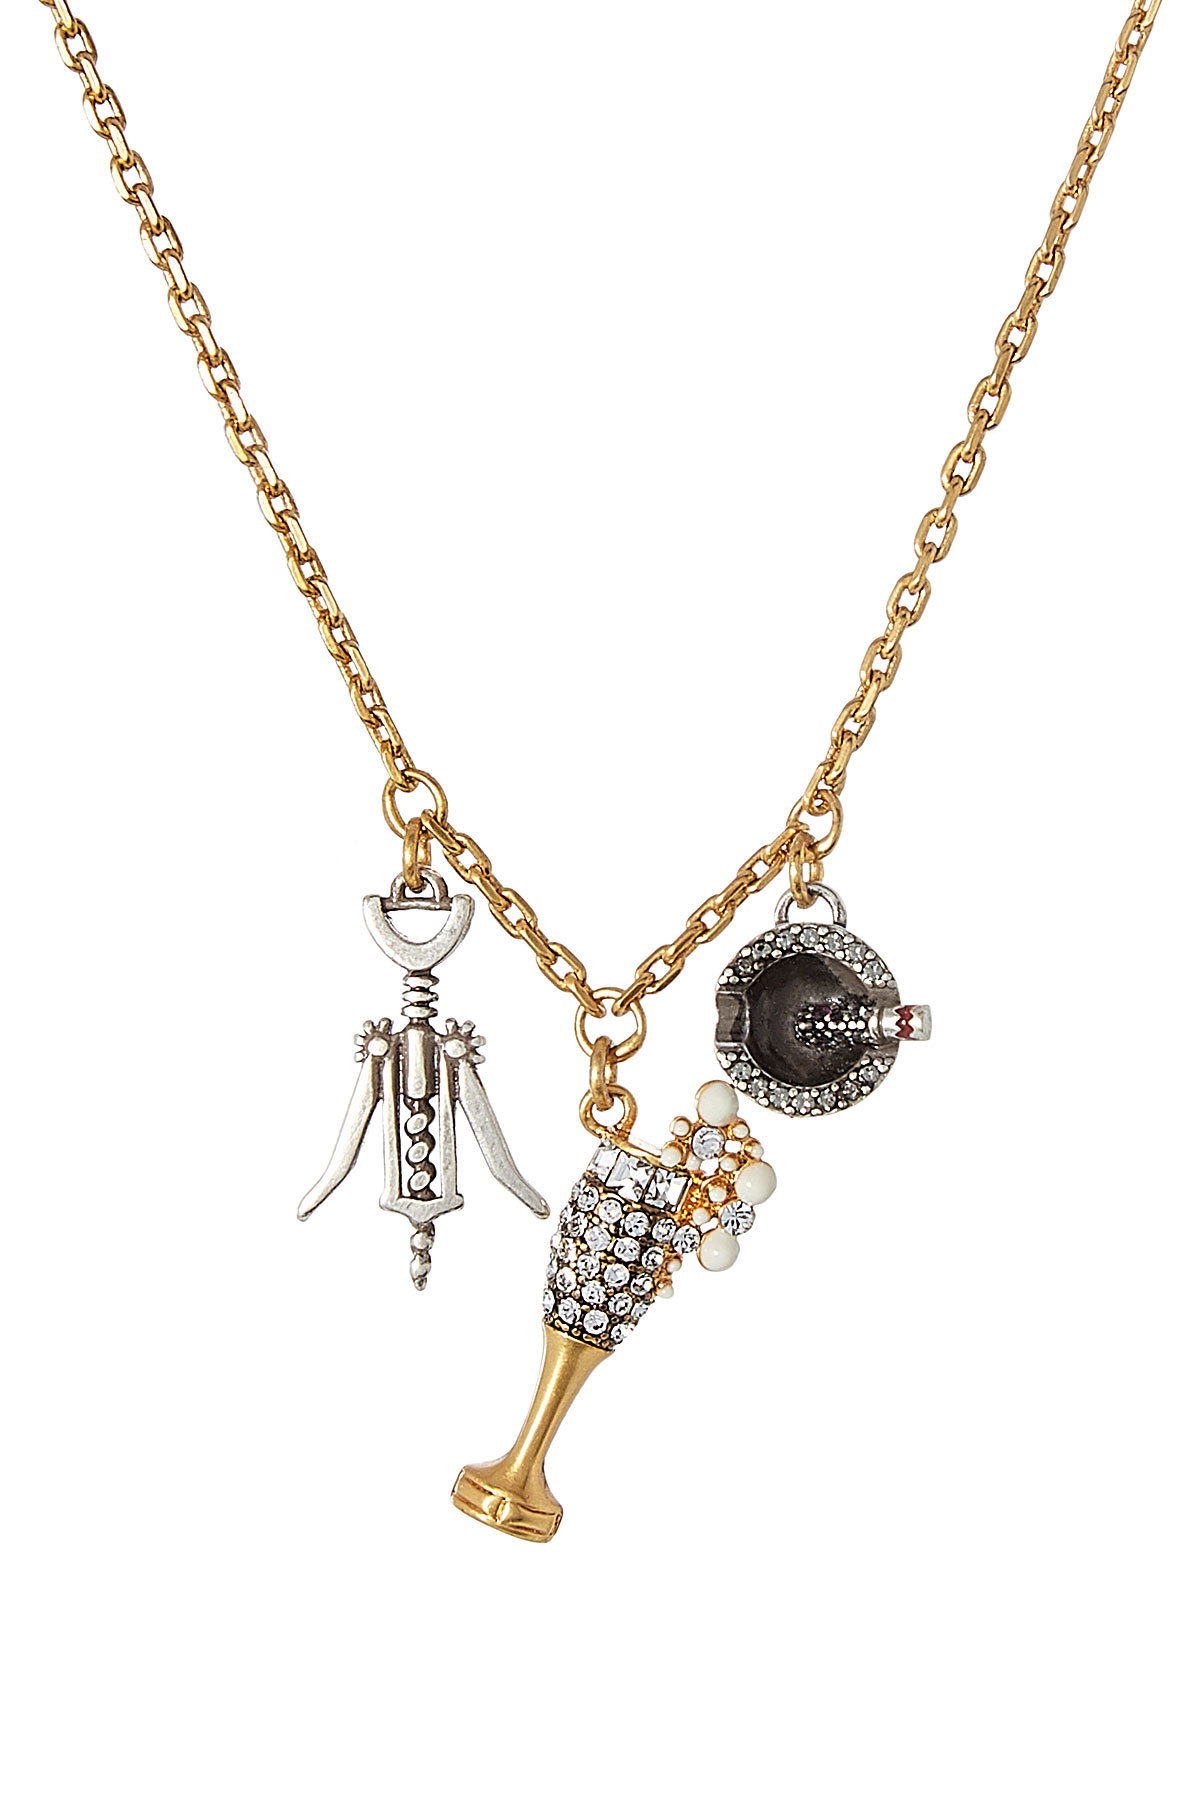 Marc Jacobs - Champagne Party Chain Necklace with Embellishment